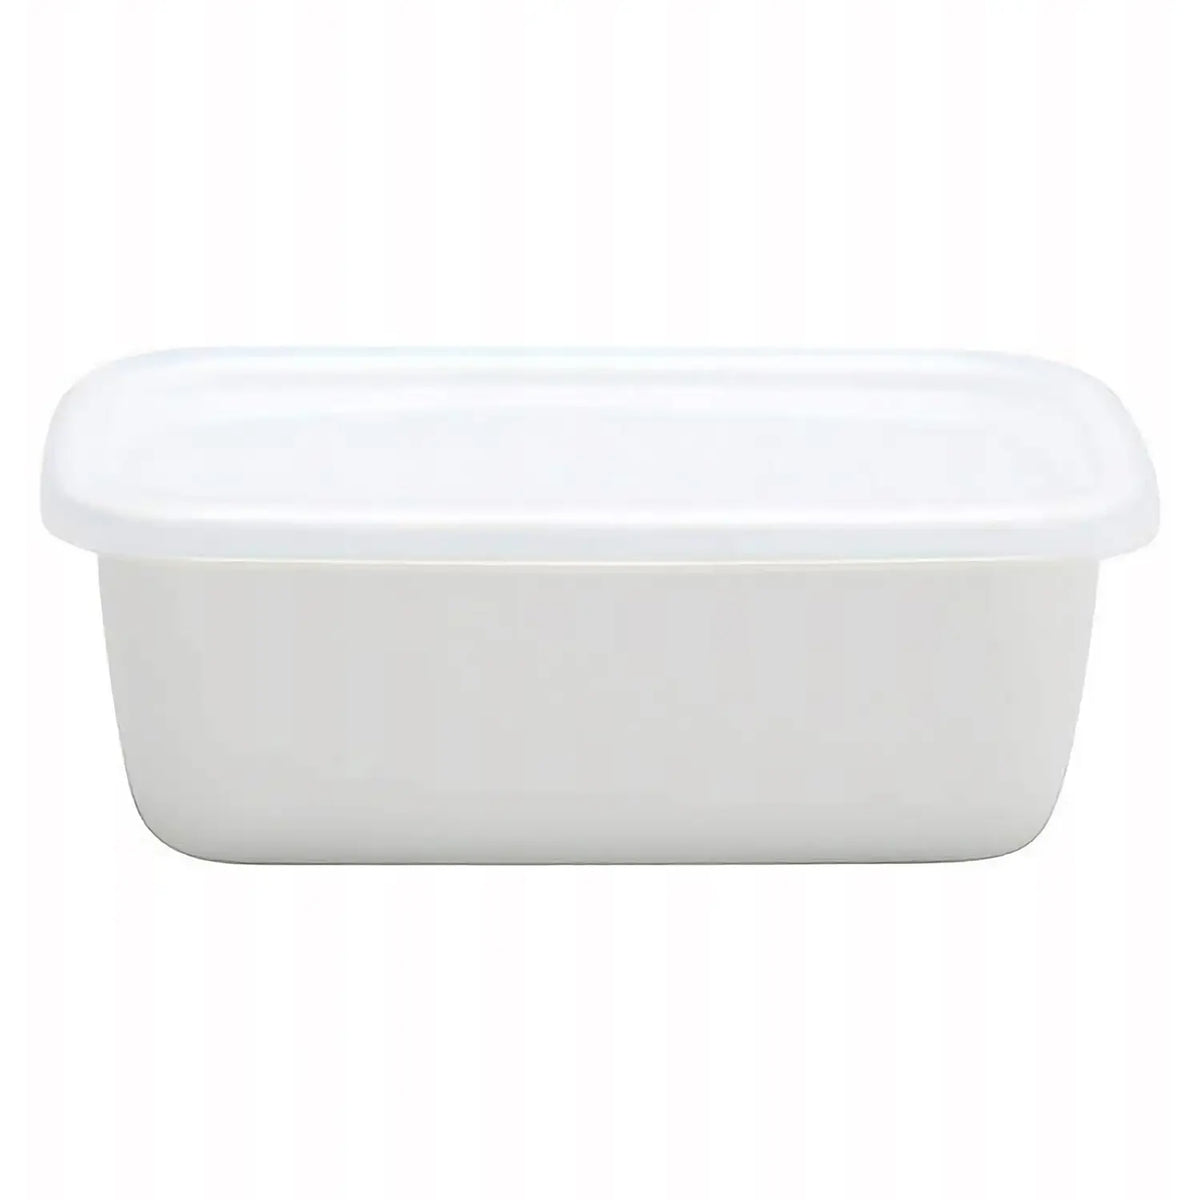 Noda Horo White Series Enamel Rectangle Deep Food Containers with Lid